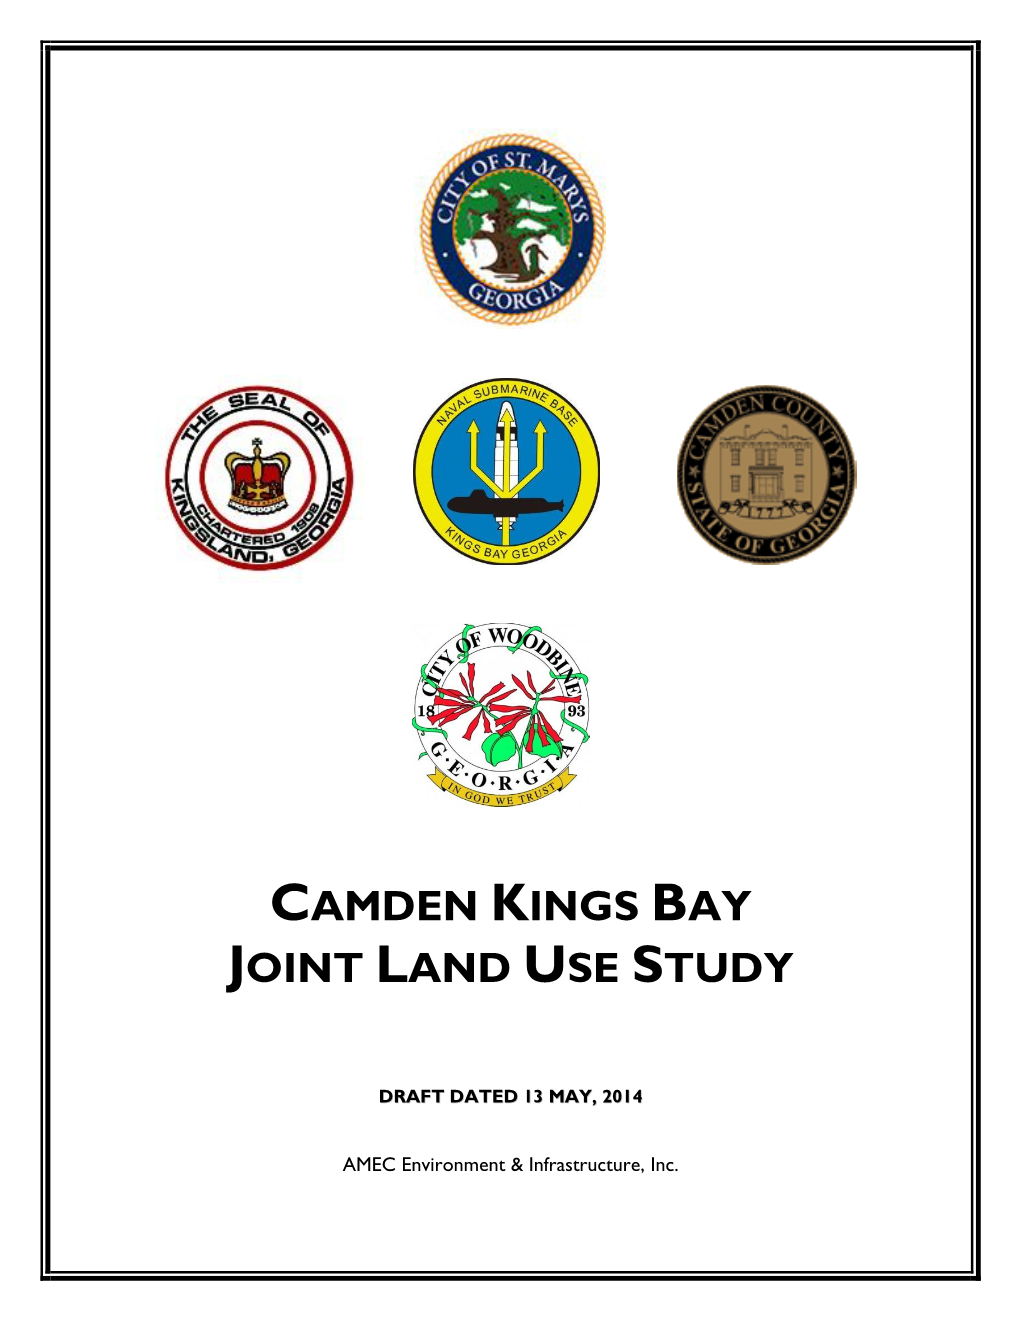 Camden Kings Bay Joint Land Use Study